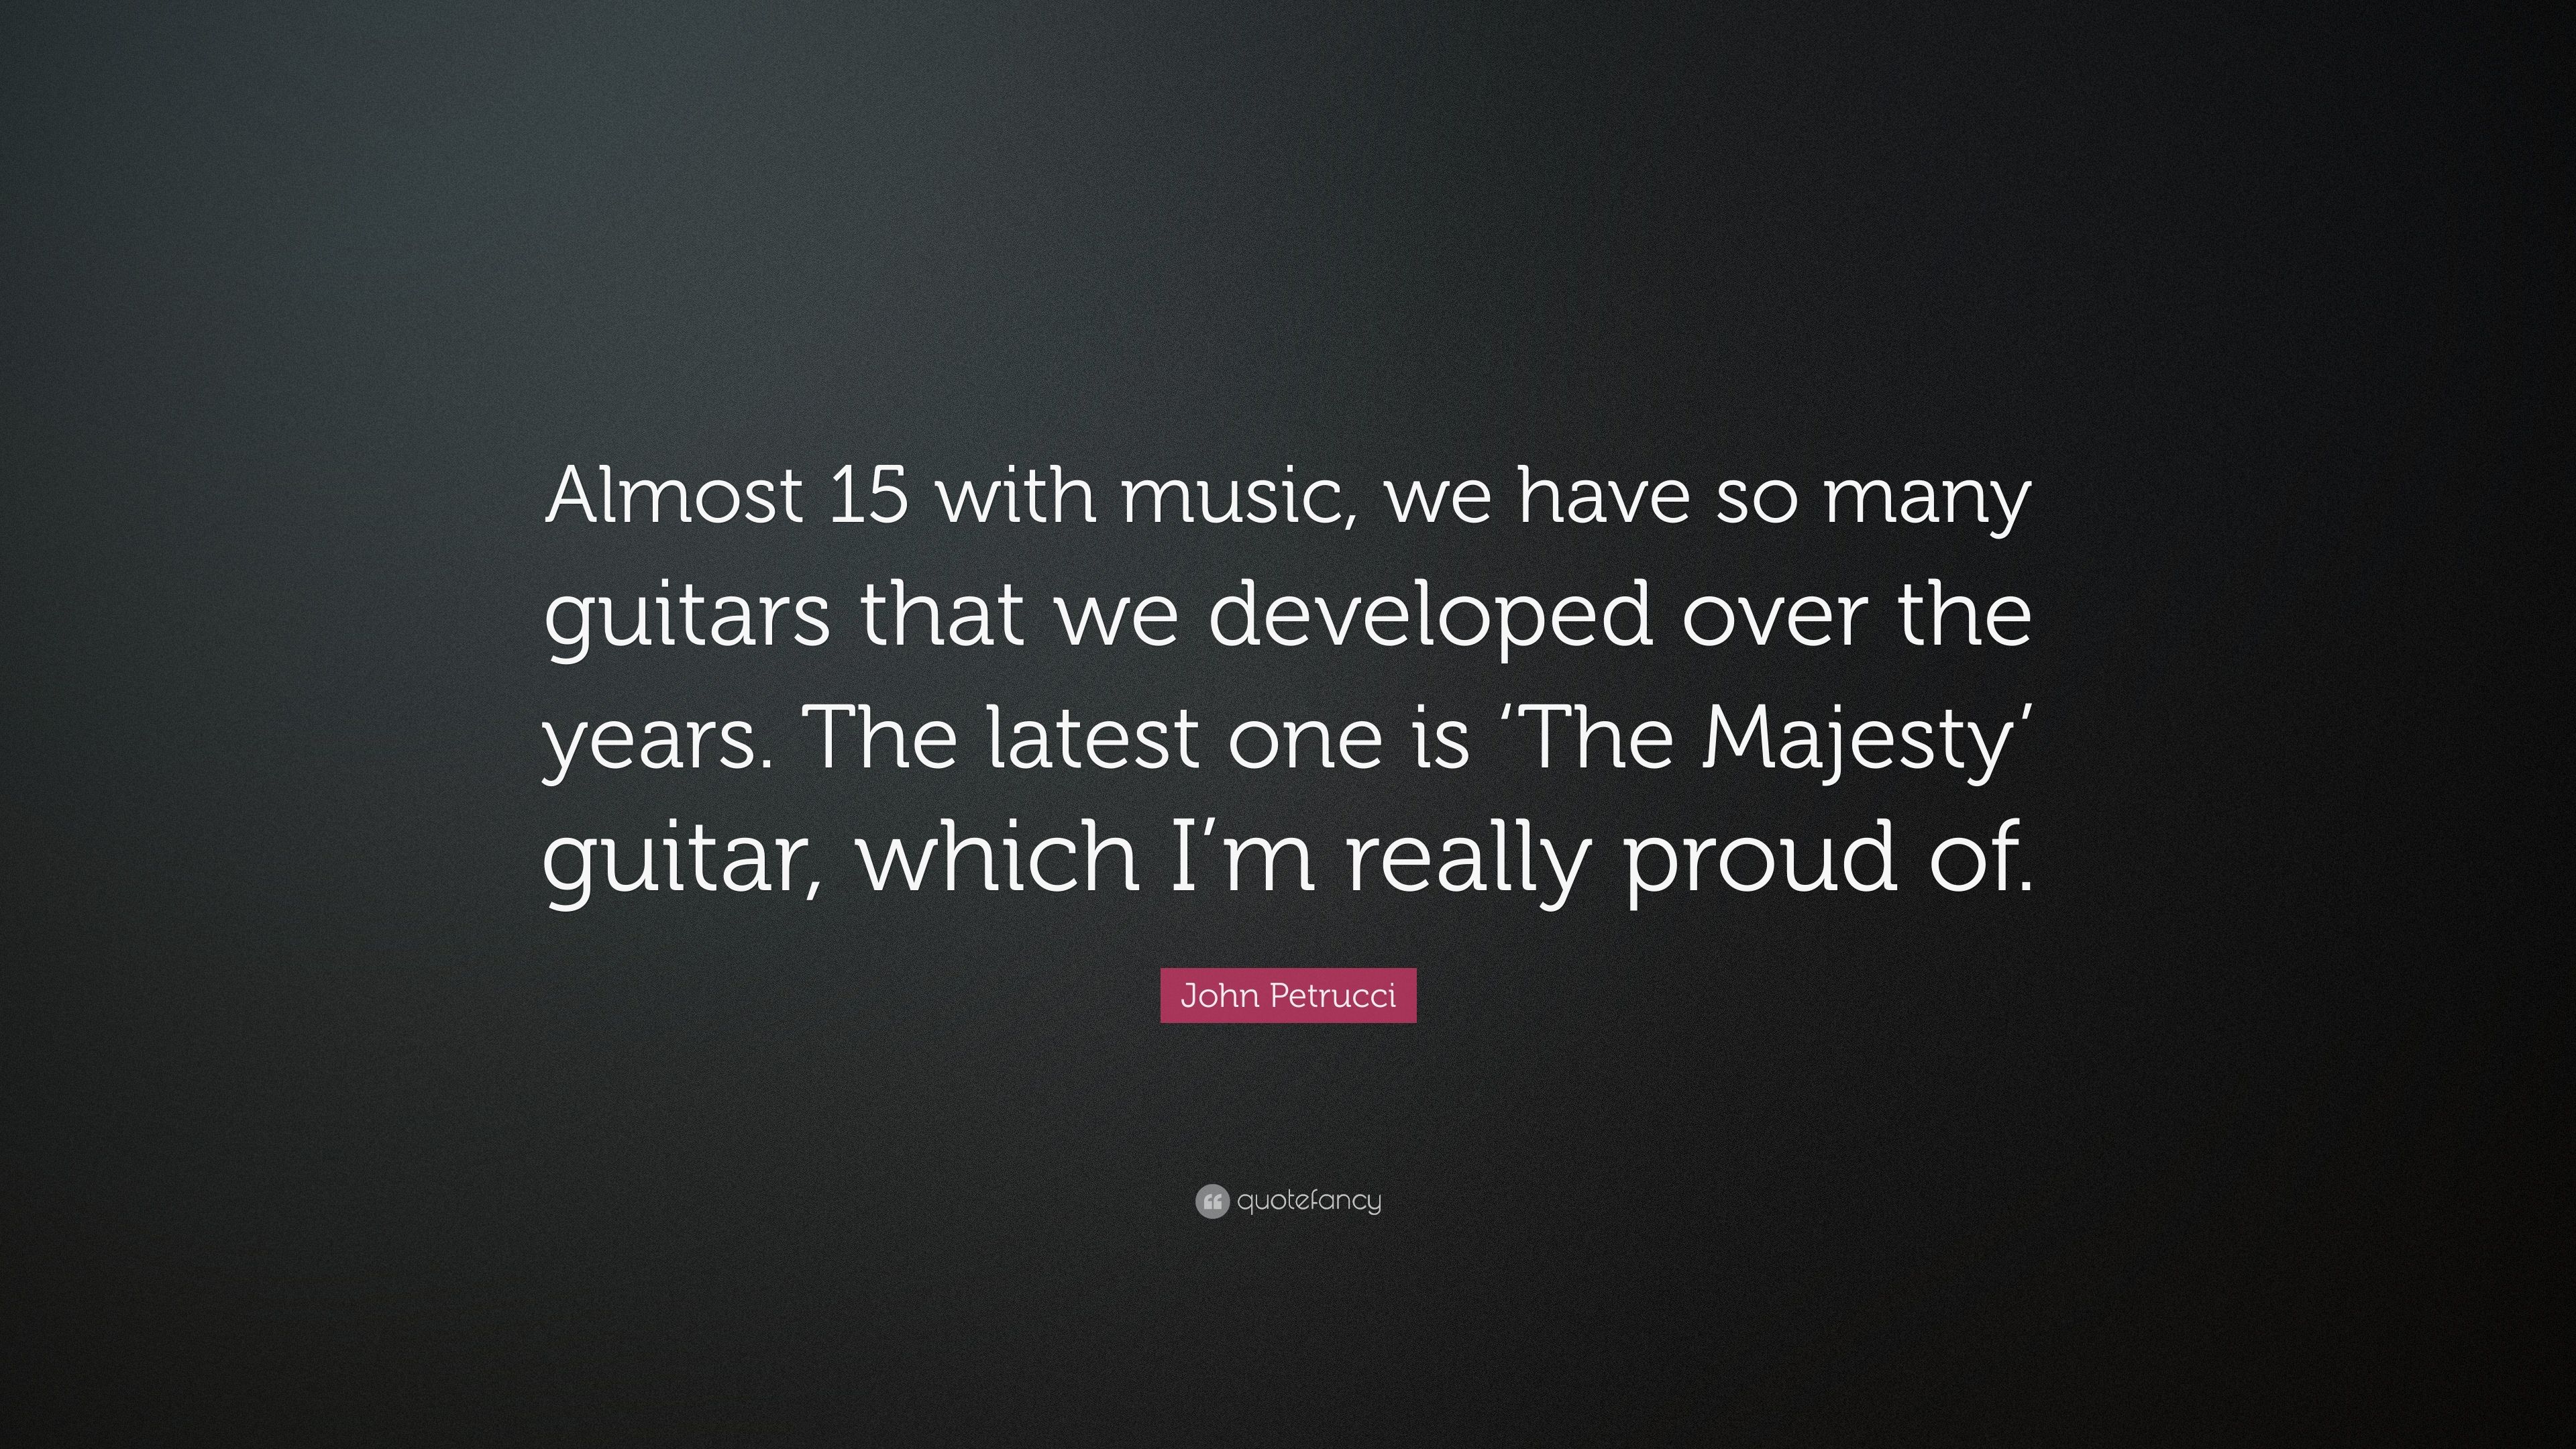 John Petrucci Quote: “Almost 15 with music, we have so many guitars